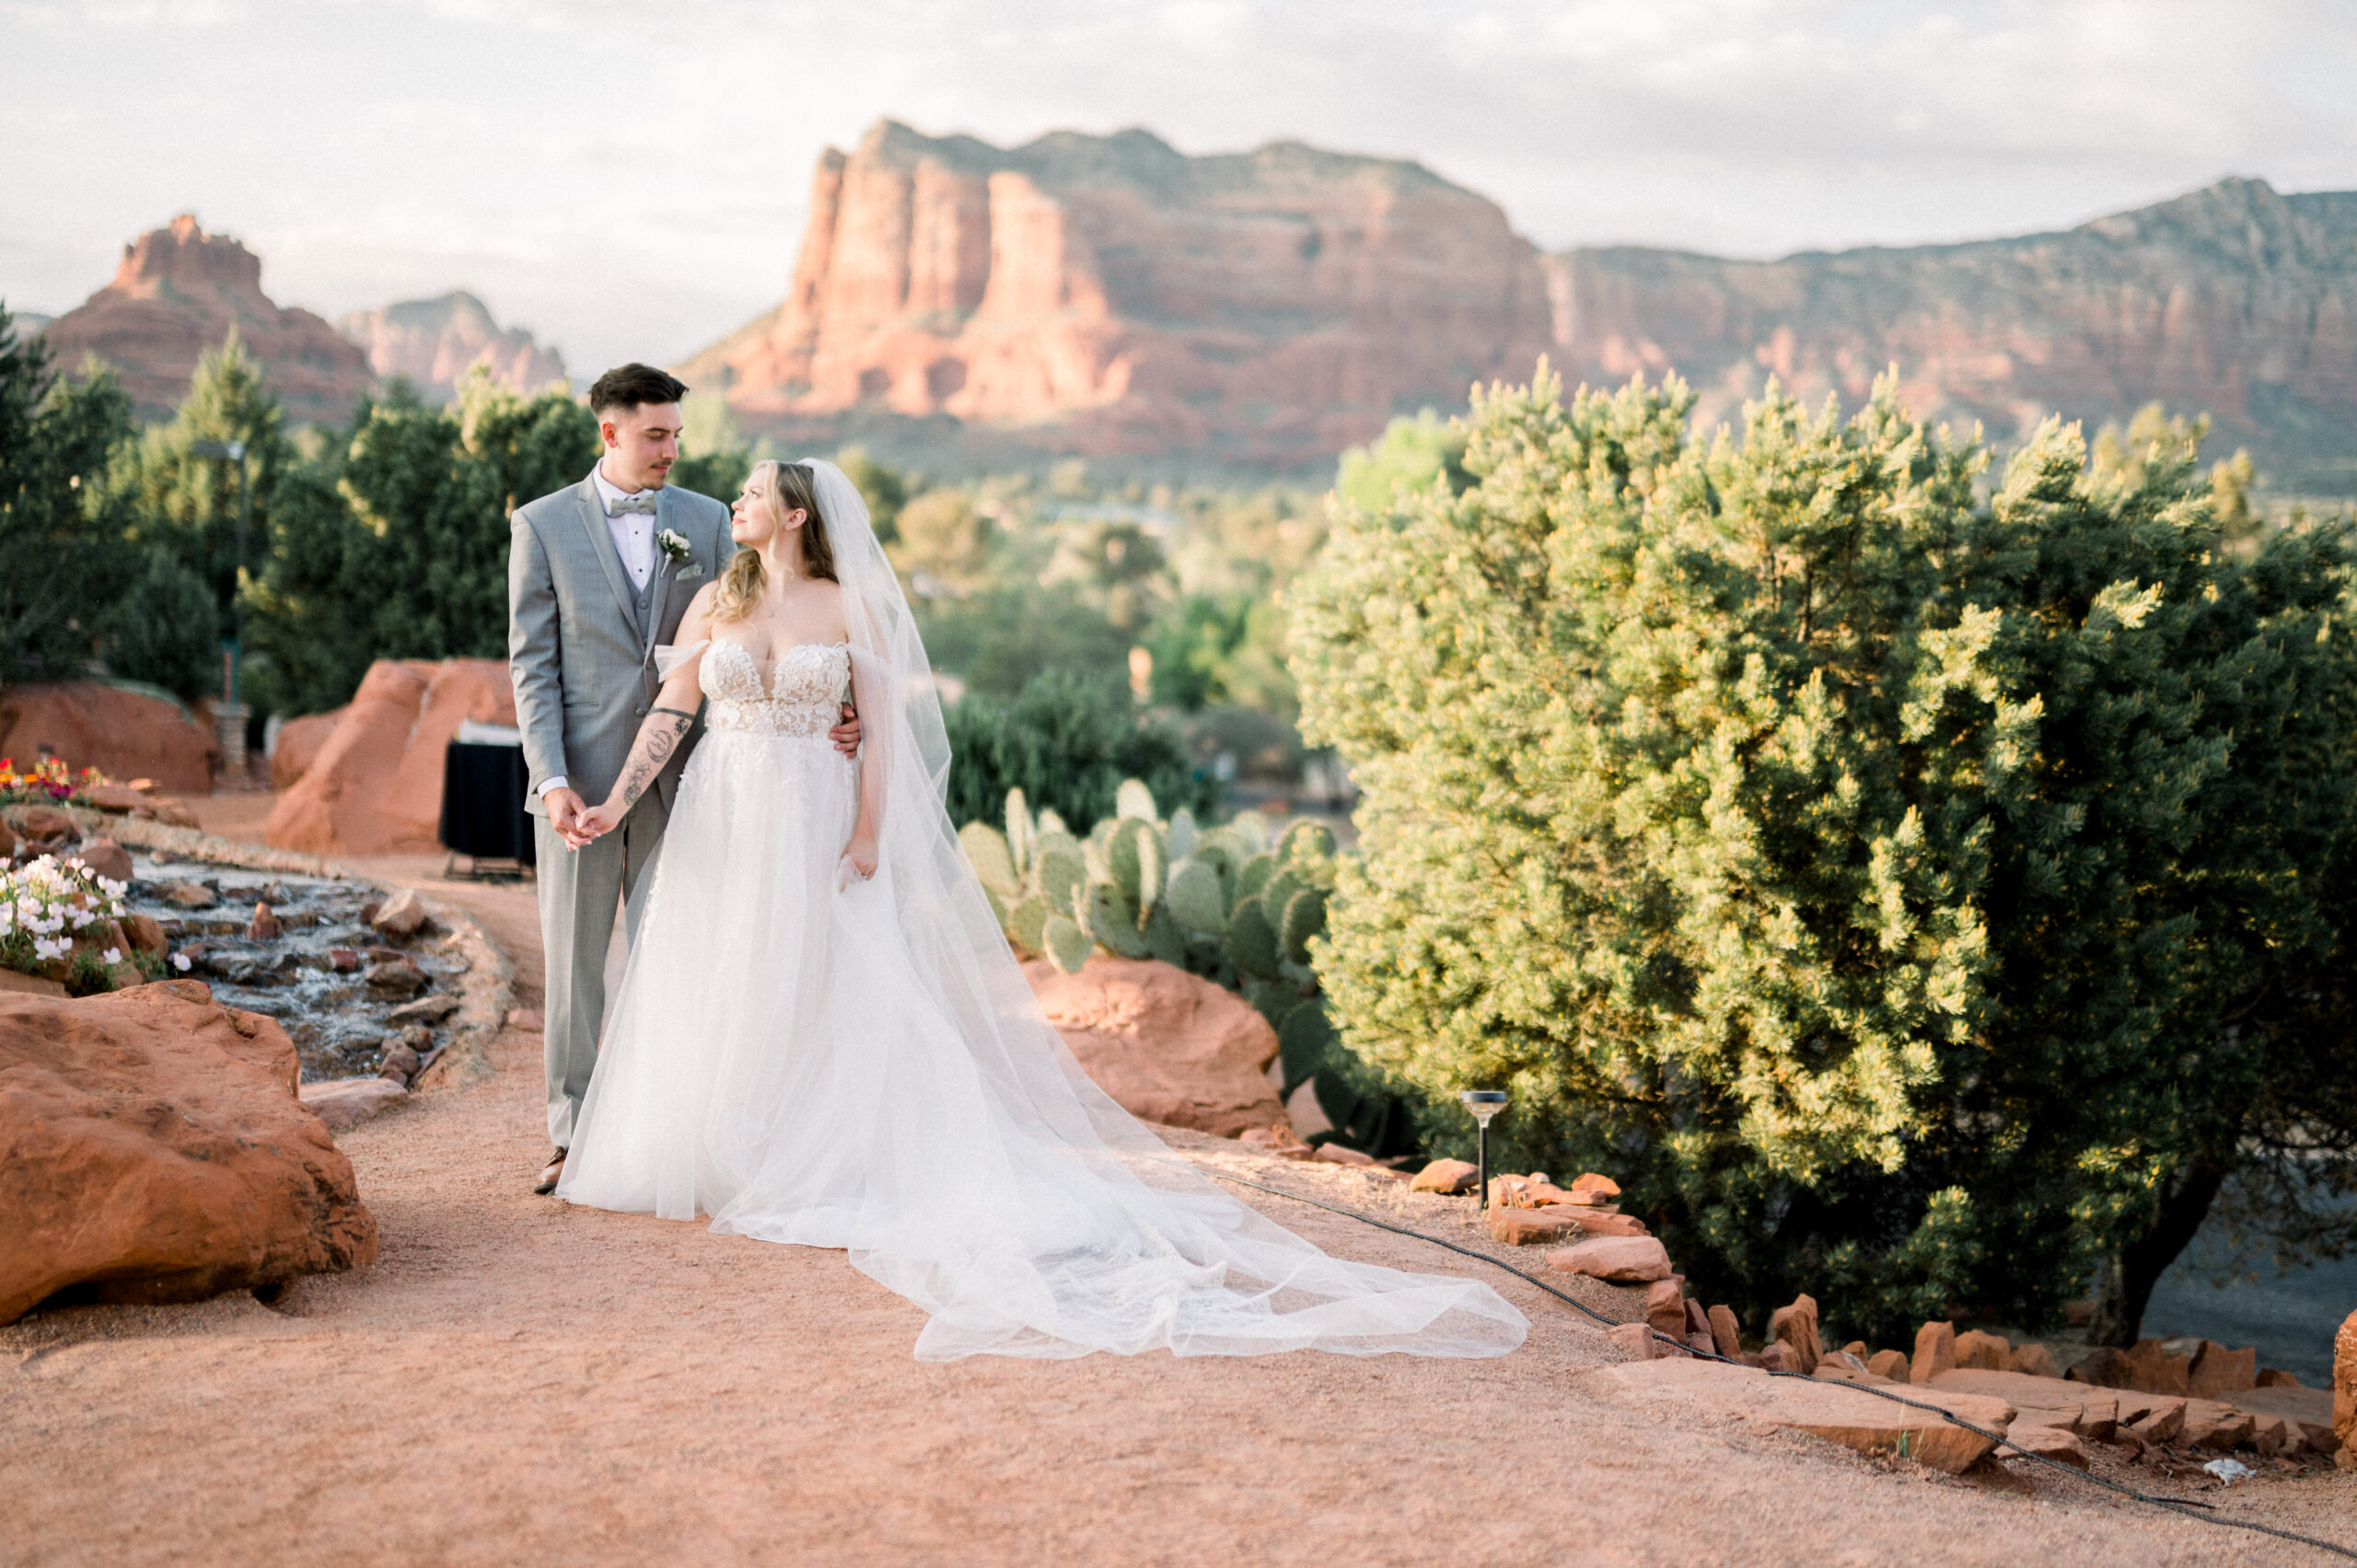 Hayli + Haydens love story started in Sedona when they were in middle school; now their next chapter starts at their Sedona Golf Resort Wedding